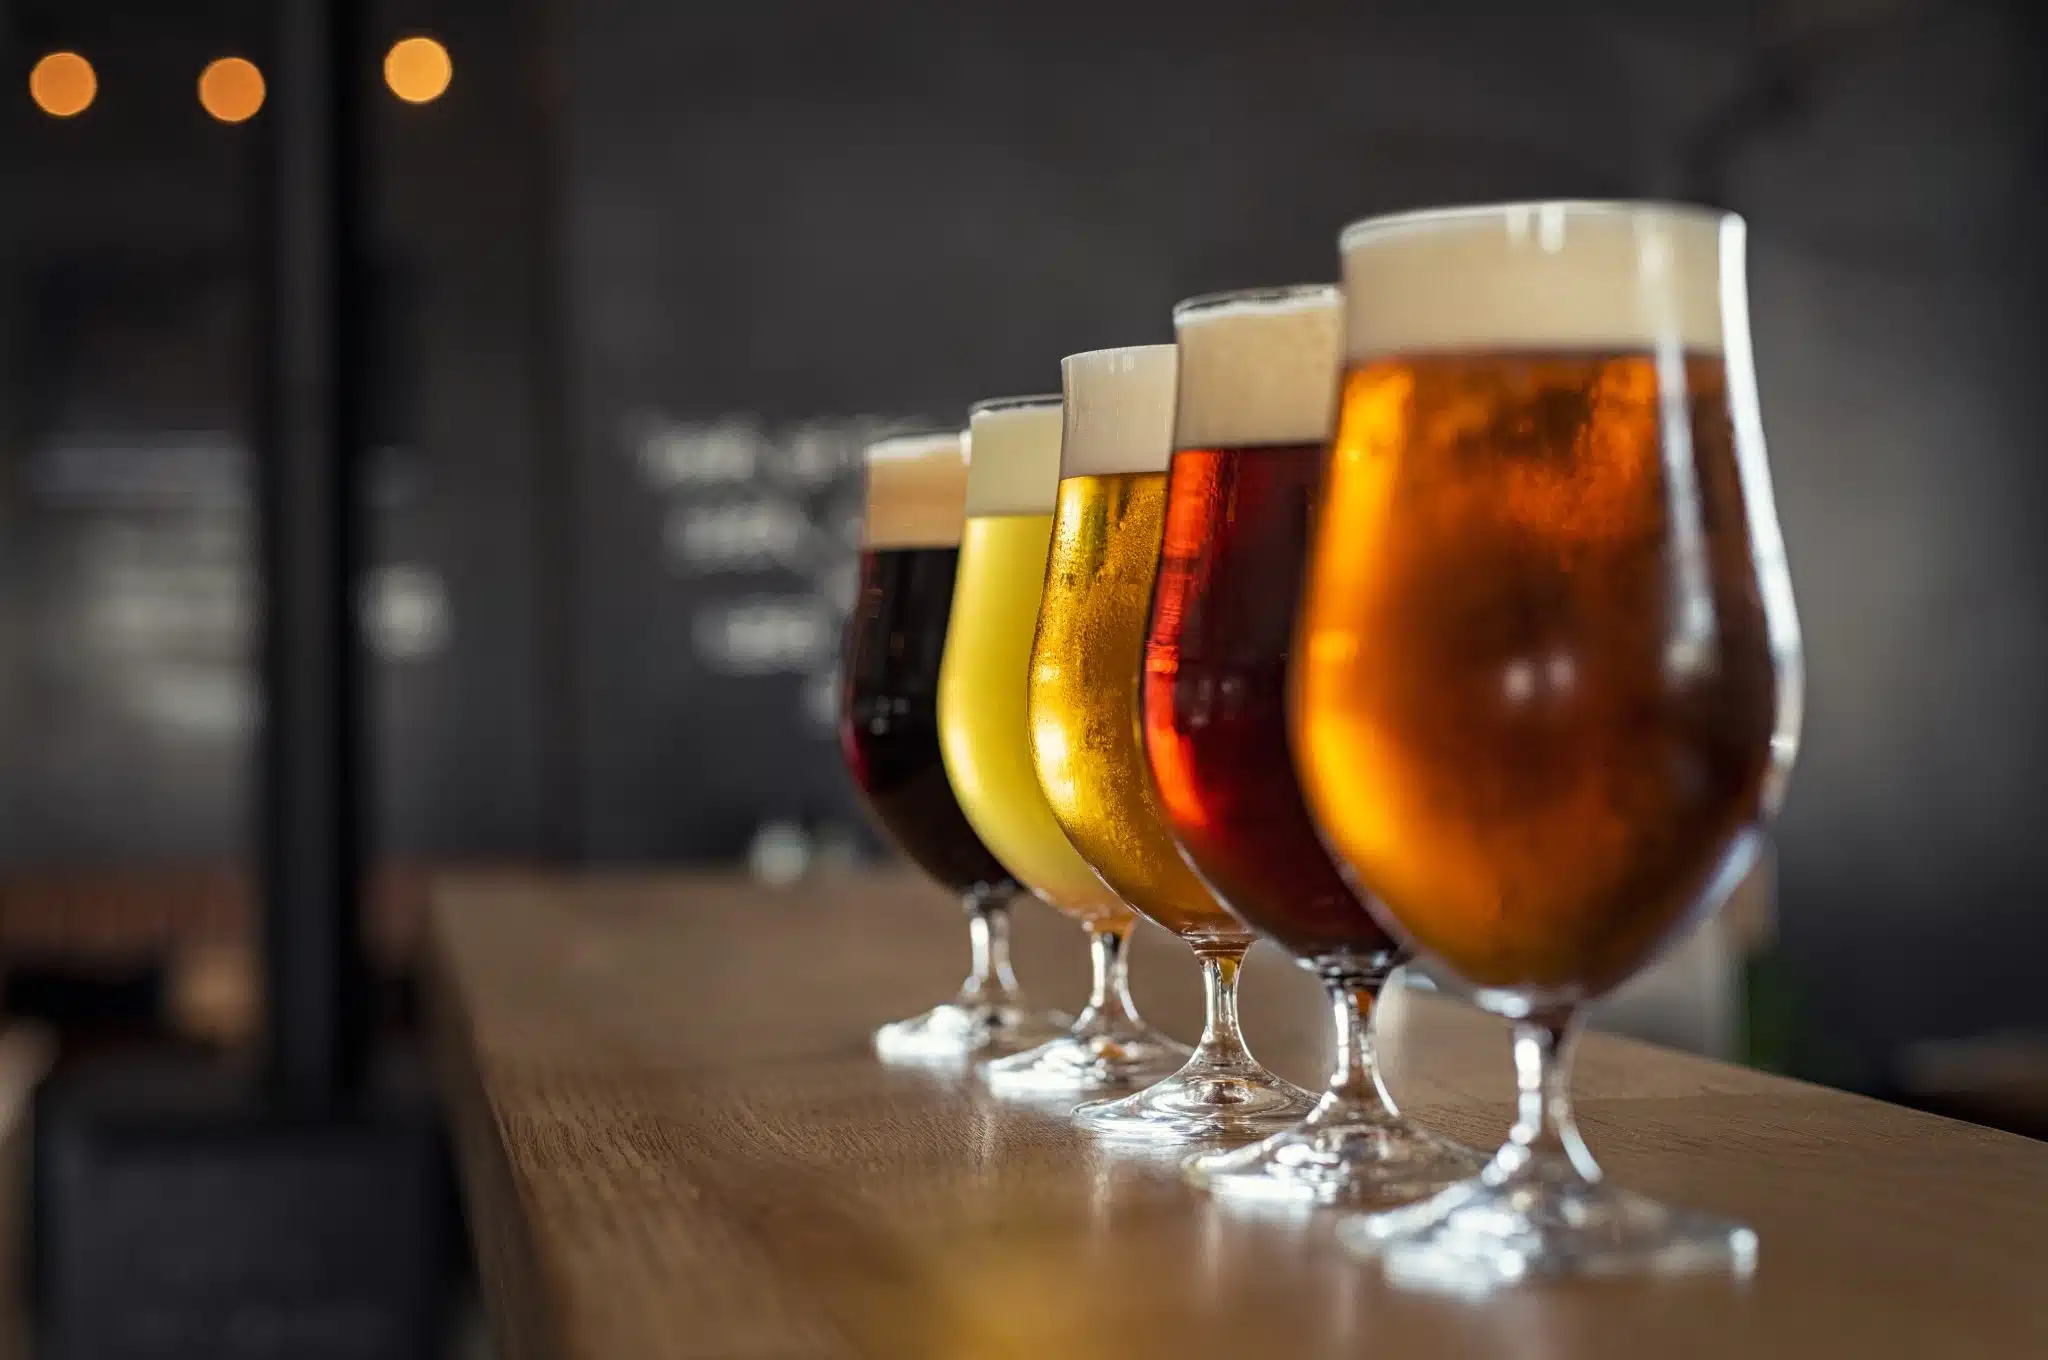 A shot of beer glasses filled with different types of beer on a brown bar table.